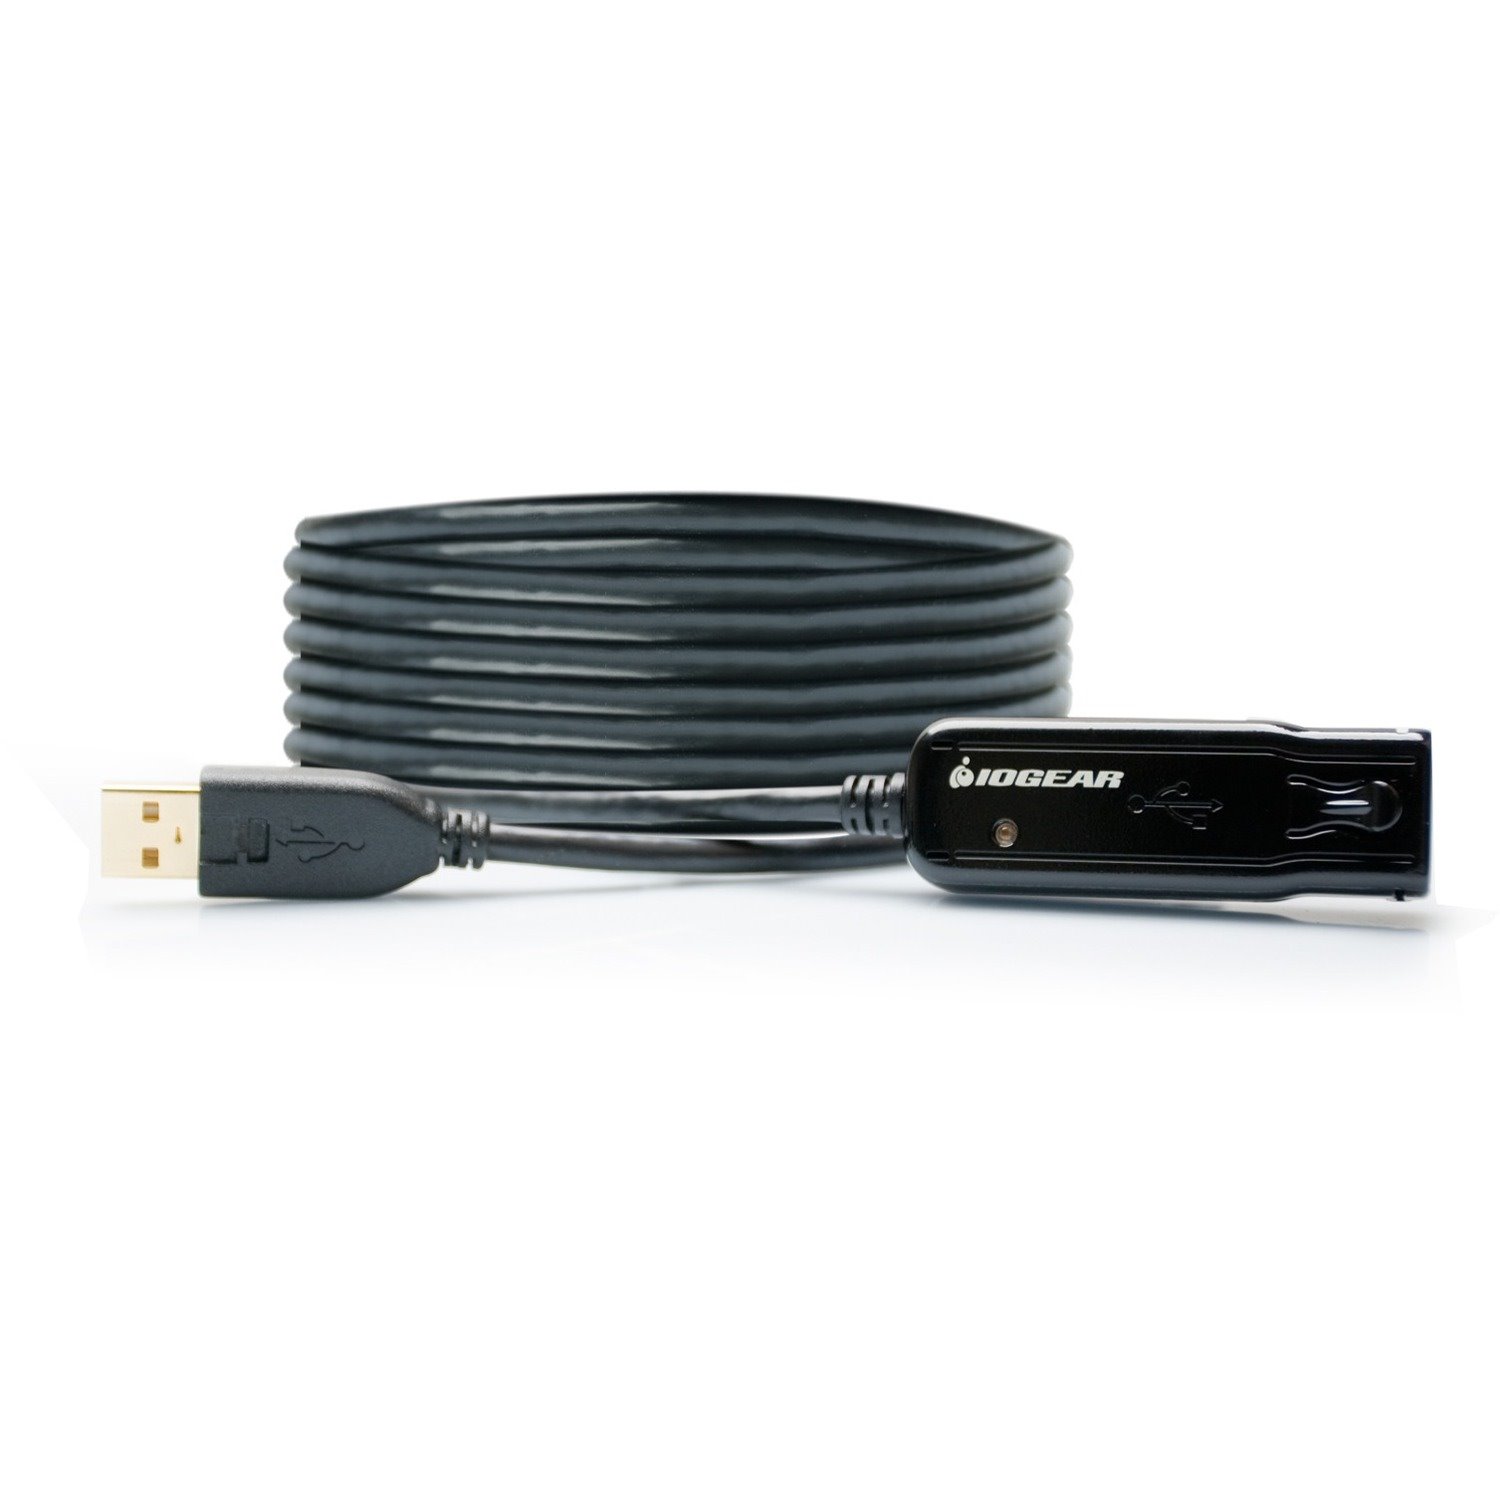 IOGEAR GUE2118 11.89 m USB Data Transfer Cable for PC